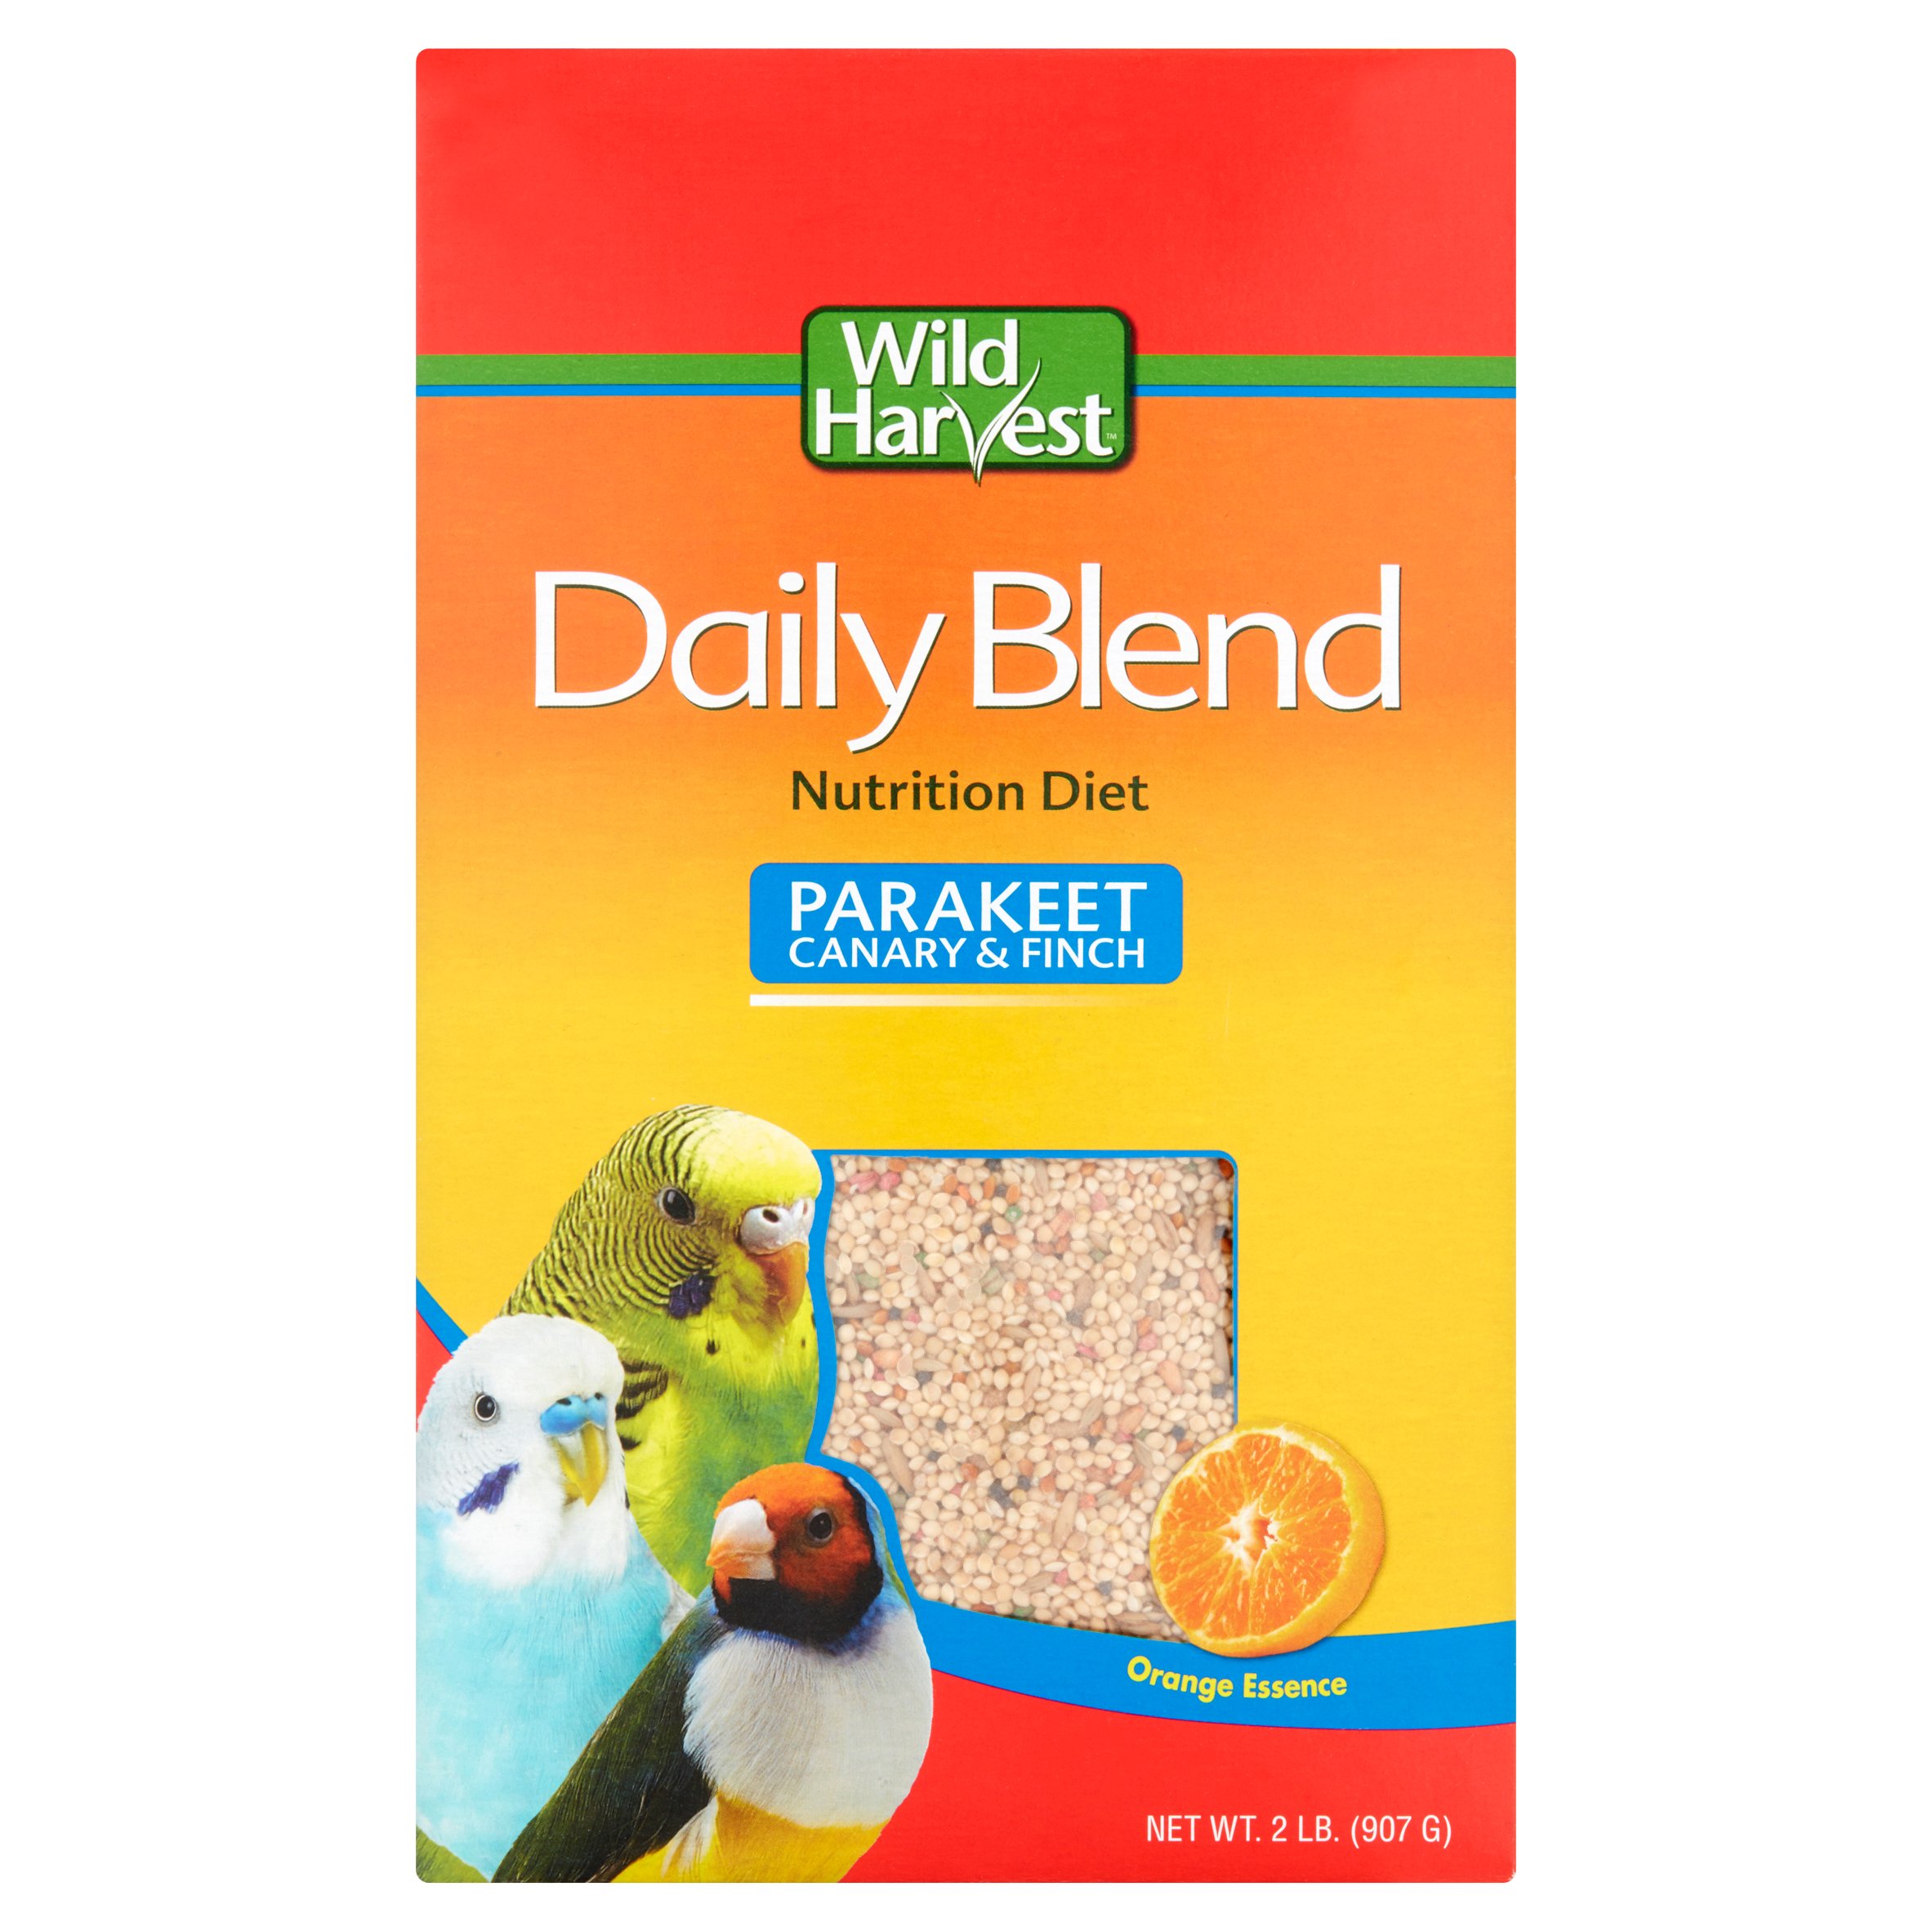 Wild Harvest Daily Blend Bird Food for Parakeet, Canary & Finch, 2 lb - image 1 of 5